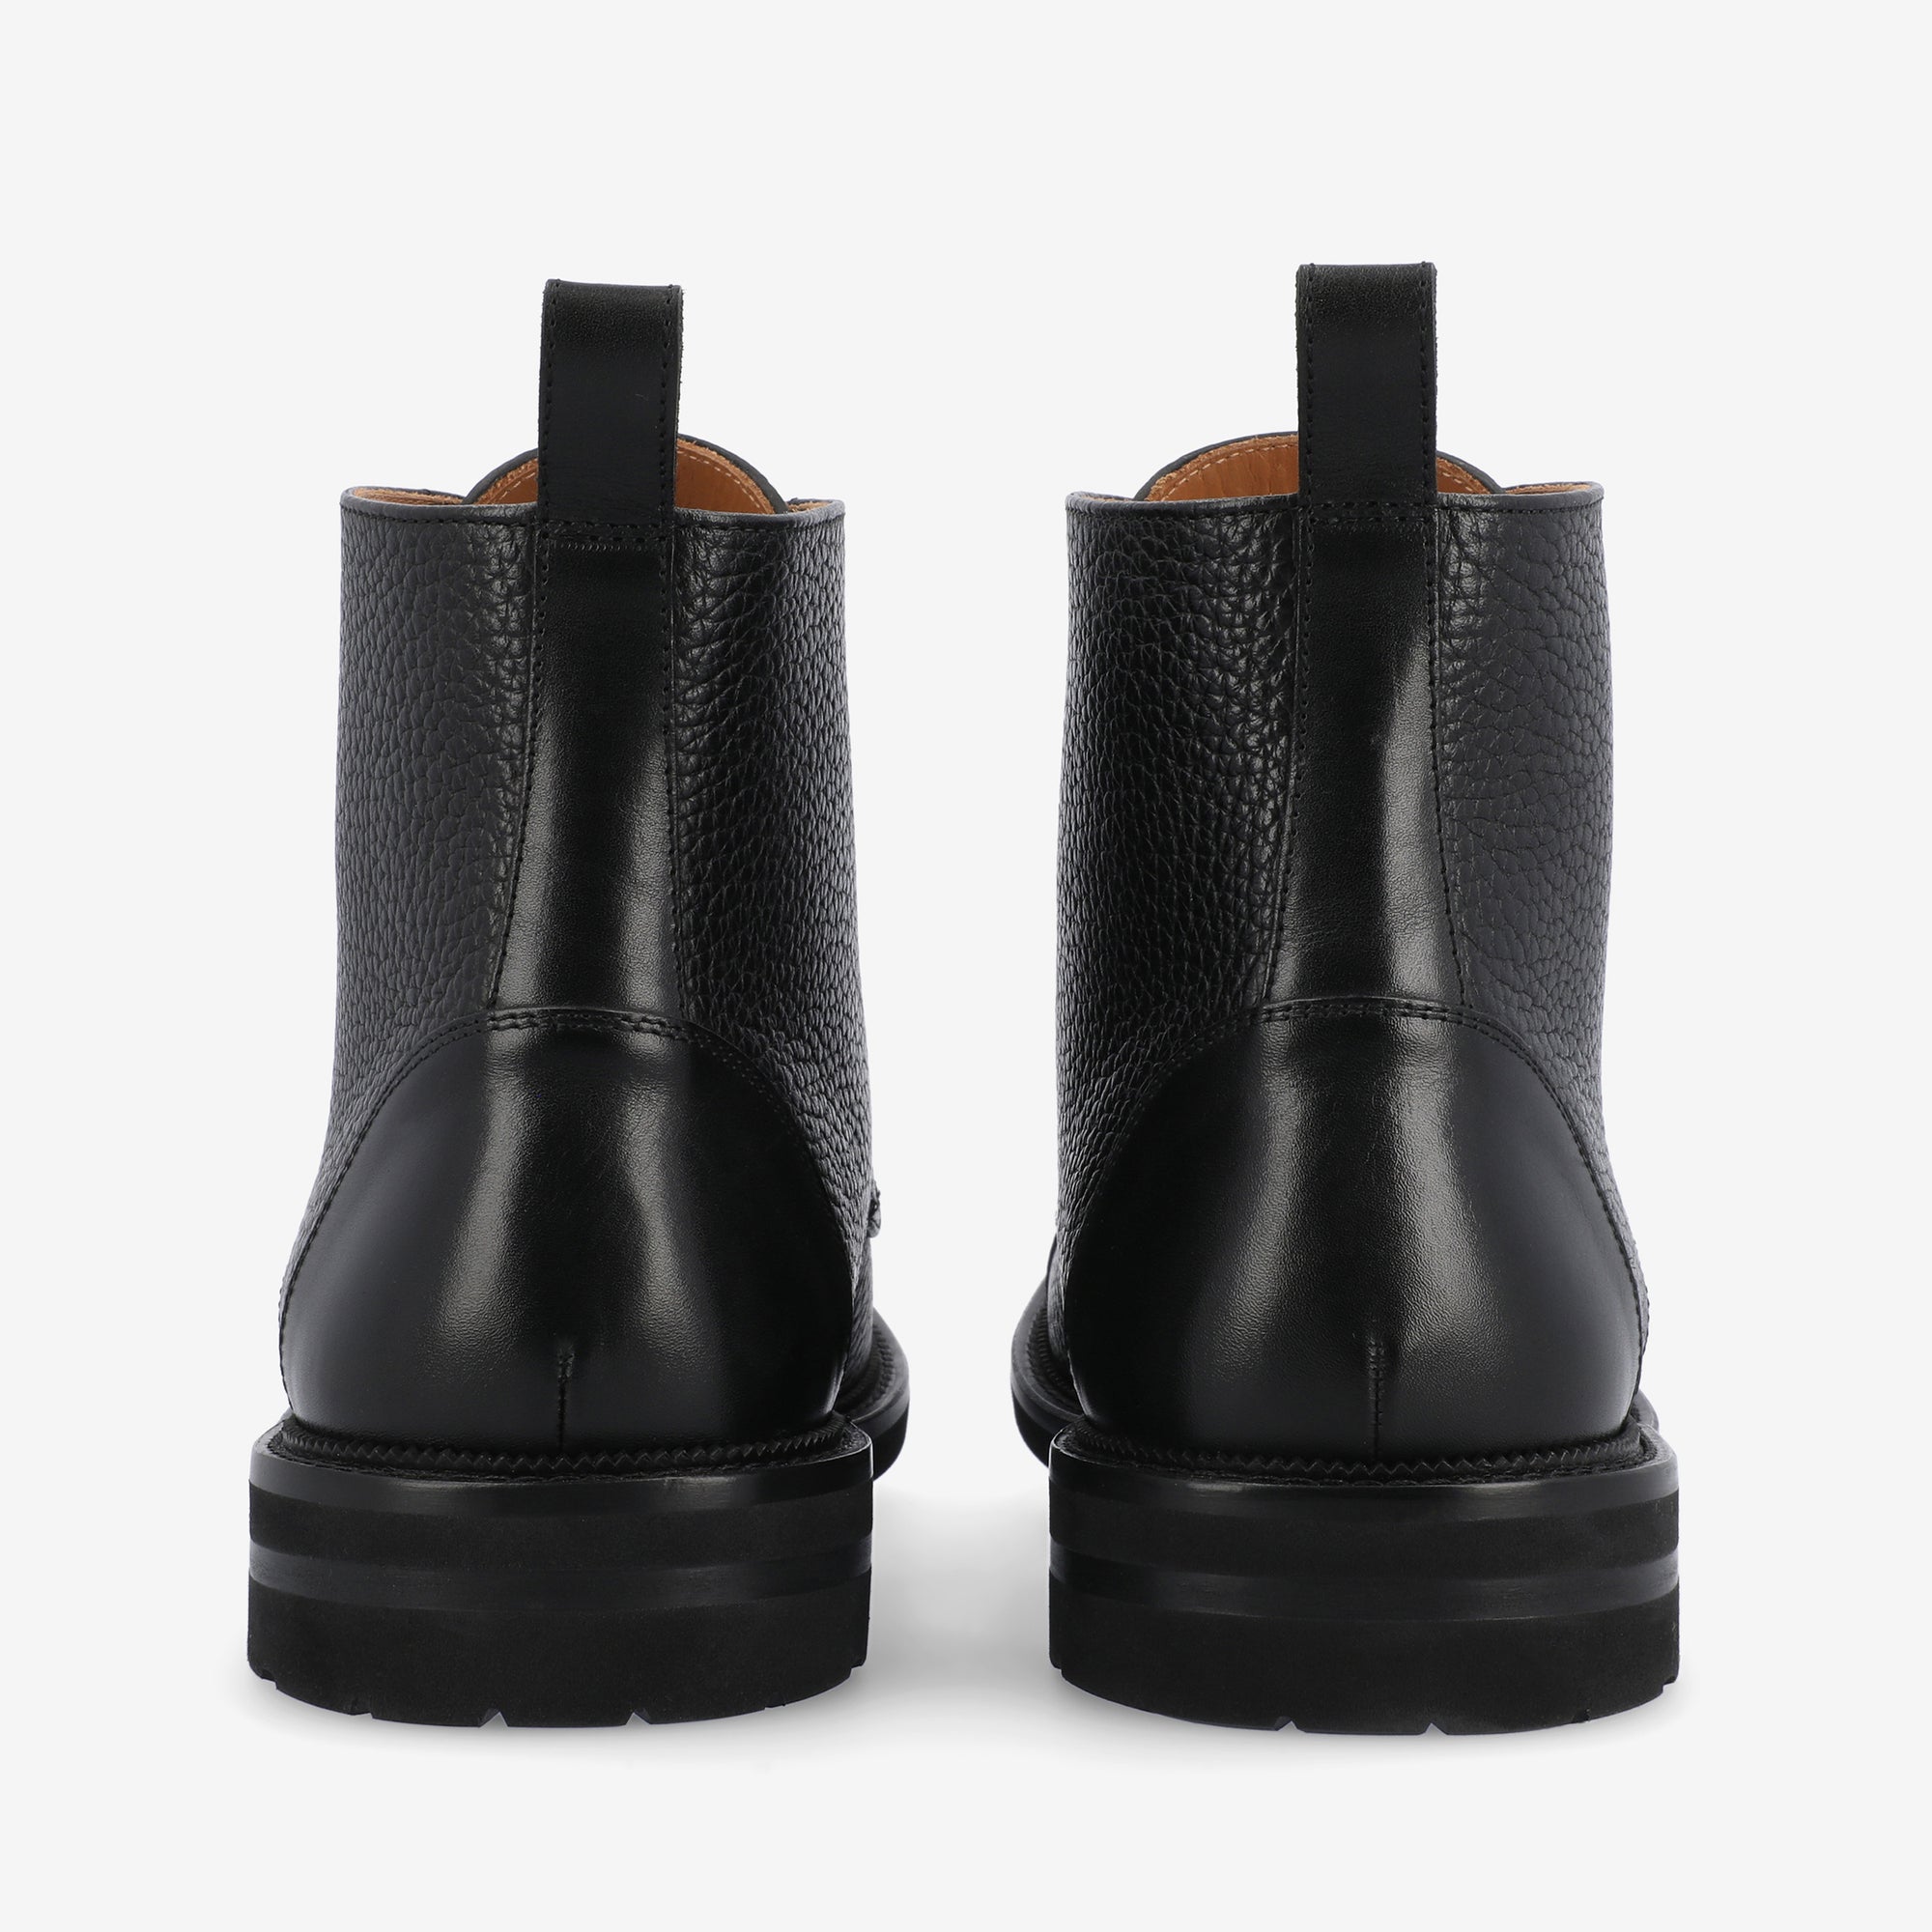 The Rome Boot in Black